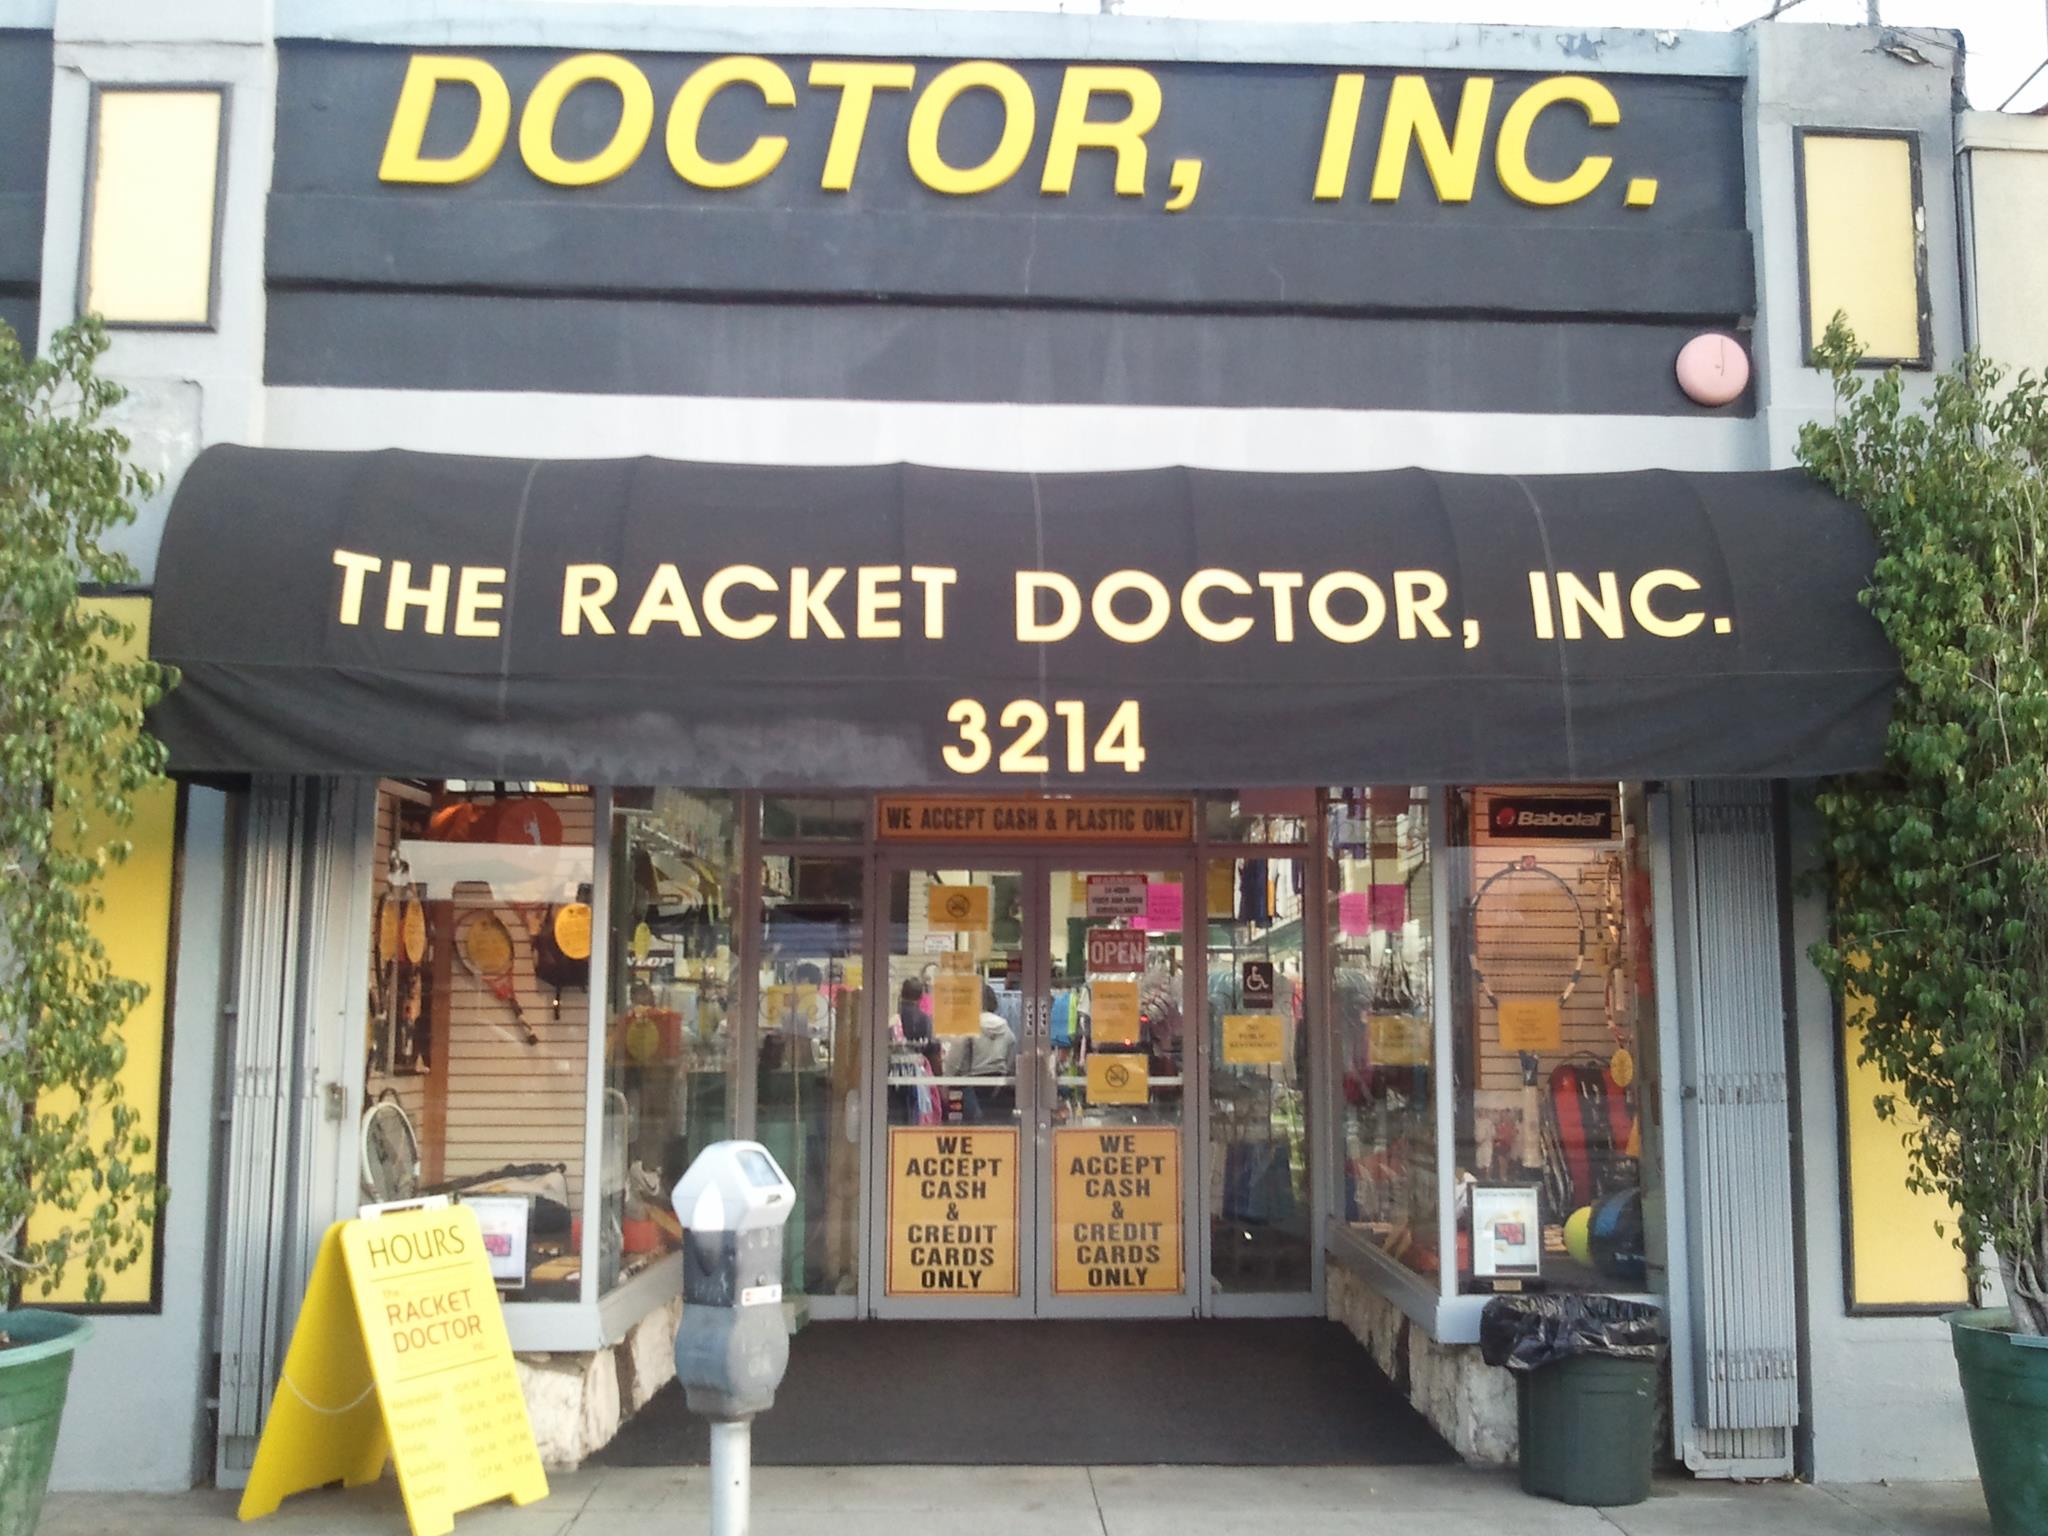 The Racket Doctor, Inc. on Facebook.com